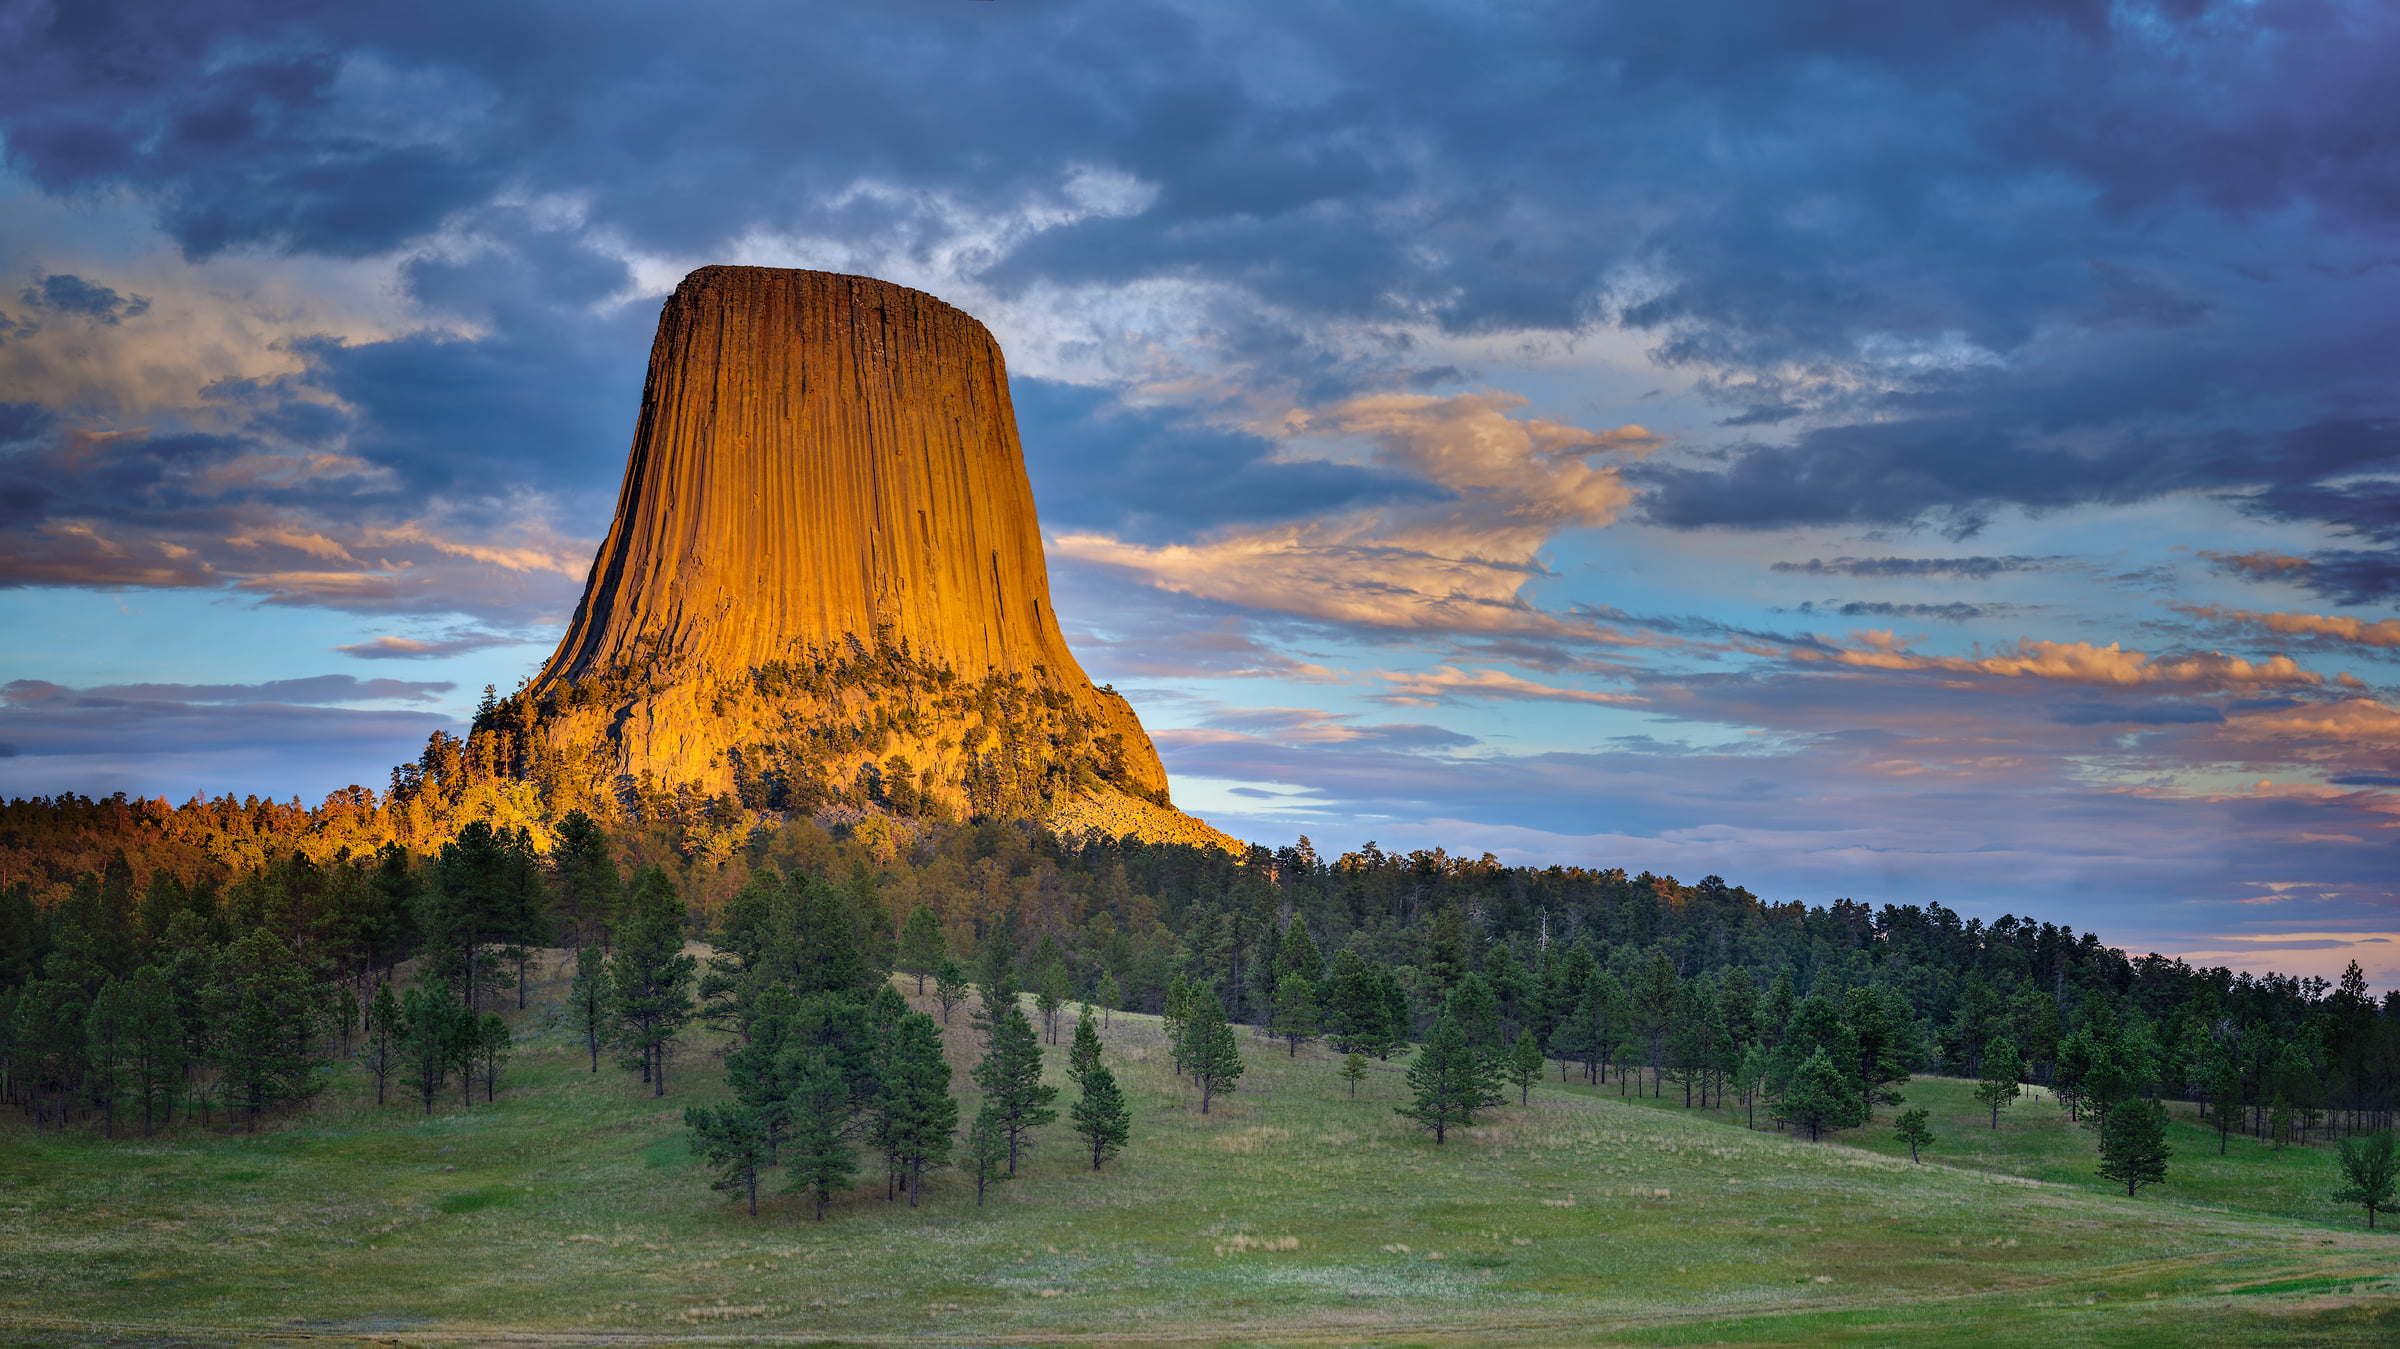 390 megapixels! A very high resolution, large-format VAST photo print of Devils Tower National Monument at sunset; landscape photograph created by John Freeman in Wyoming